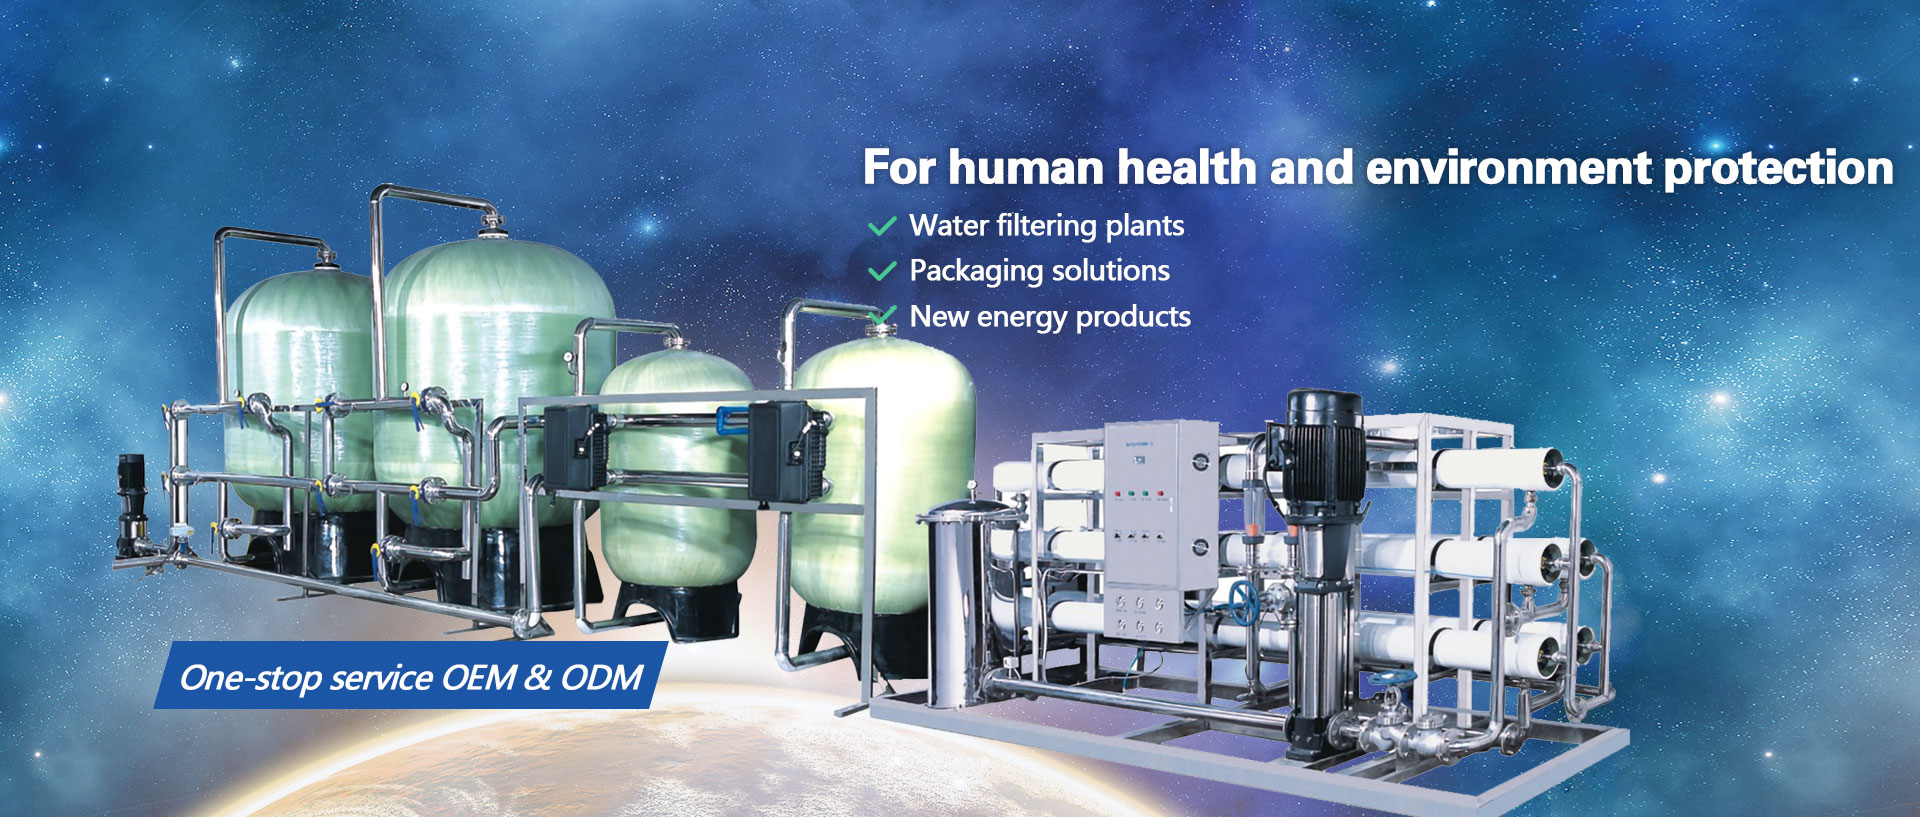 For human health and environment protection